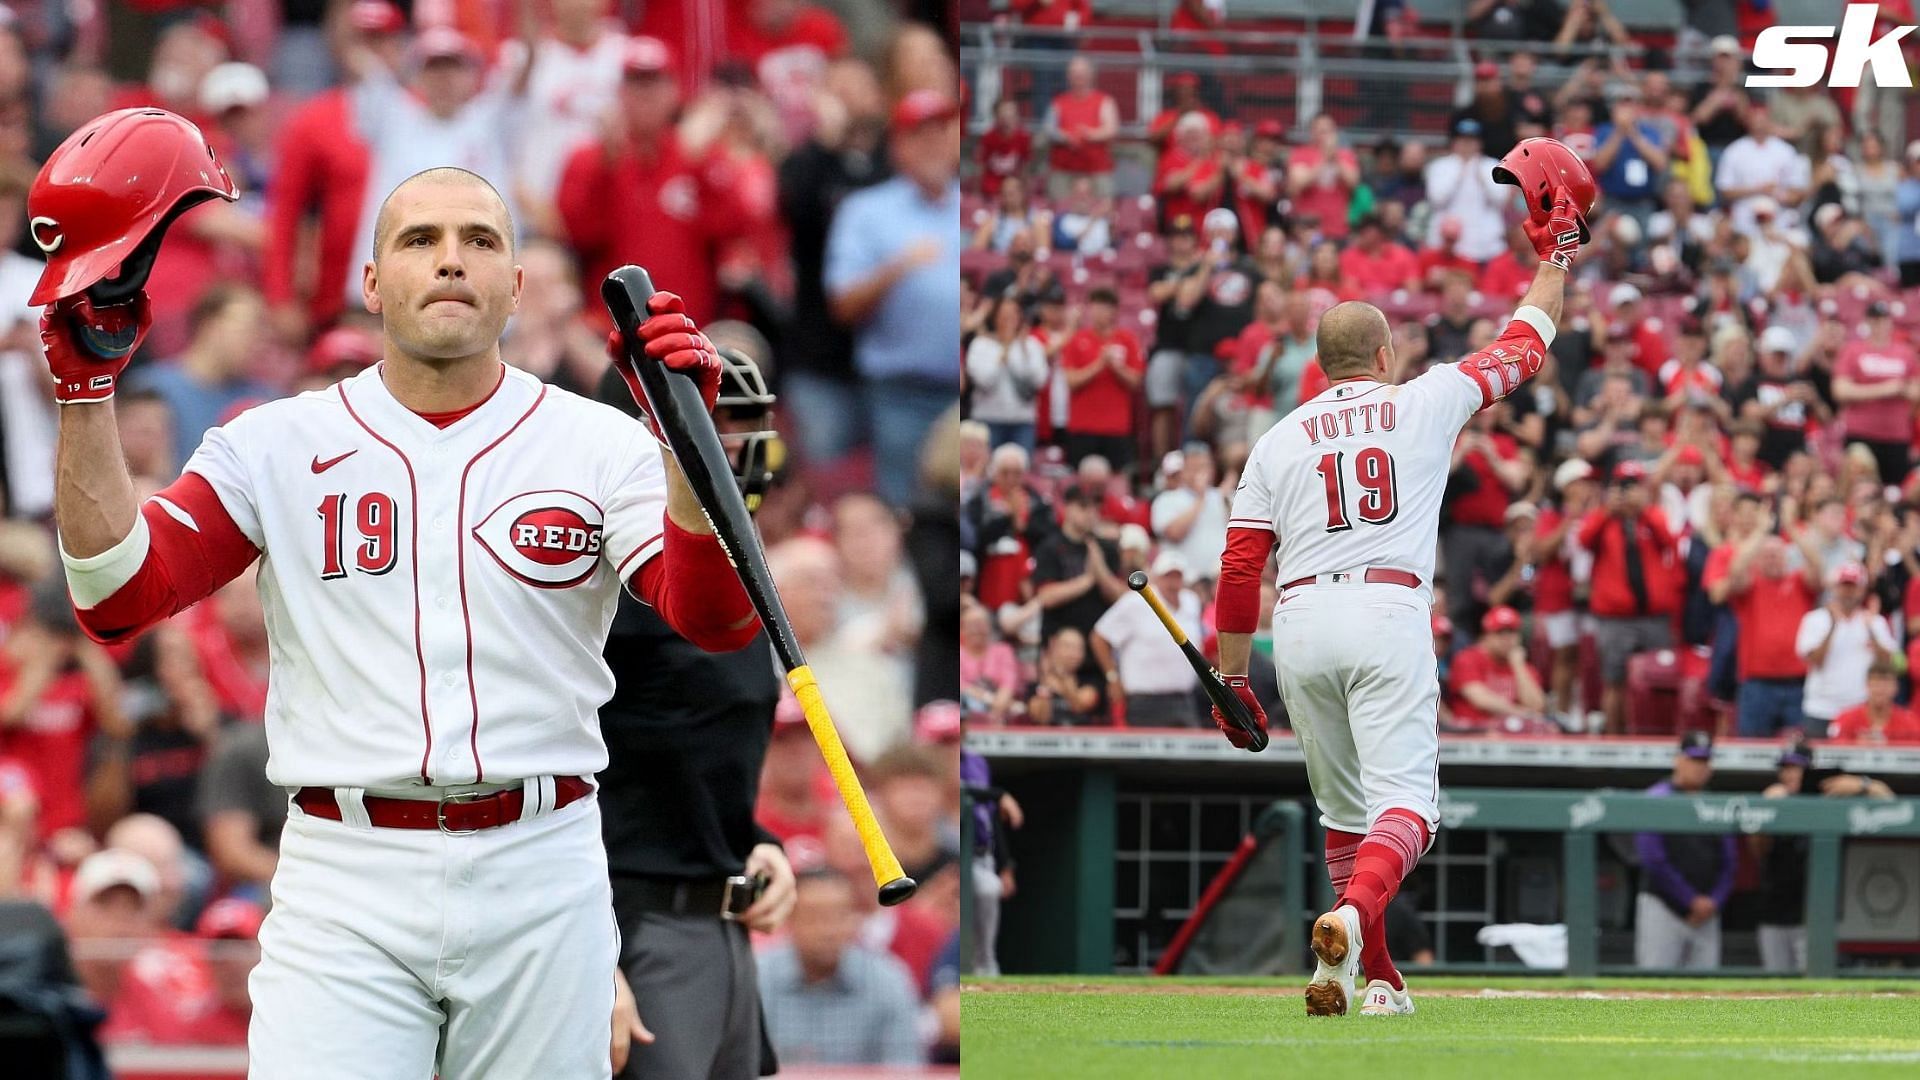 Joey Votto goes deep in his FIRST GAME in over 11 months 